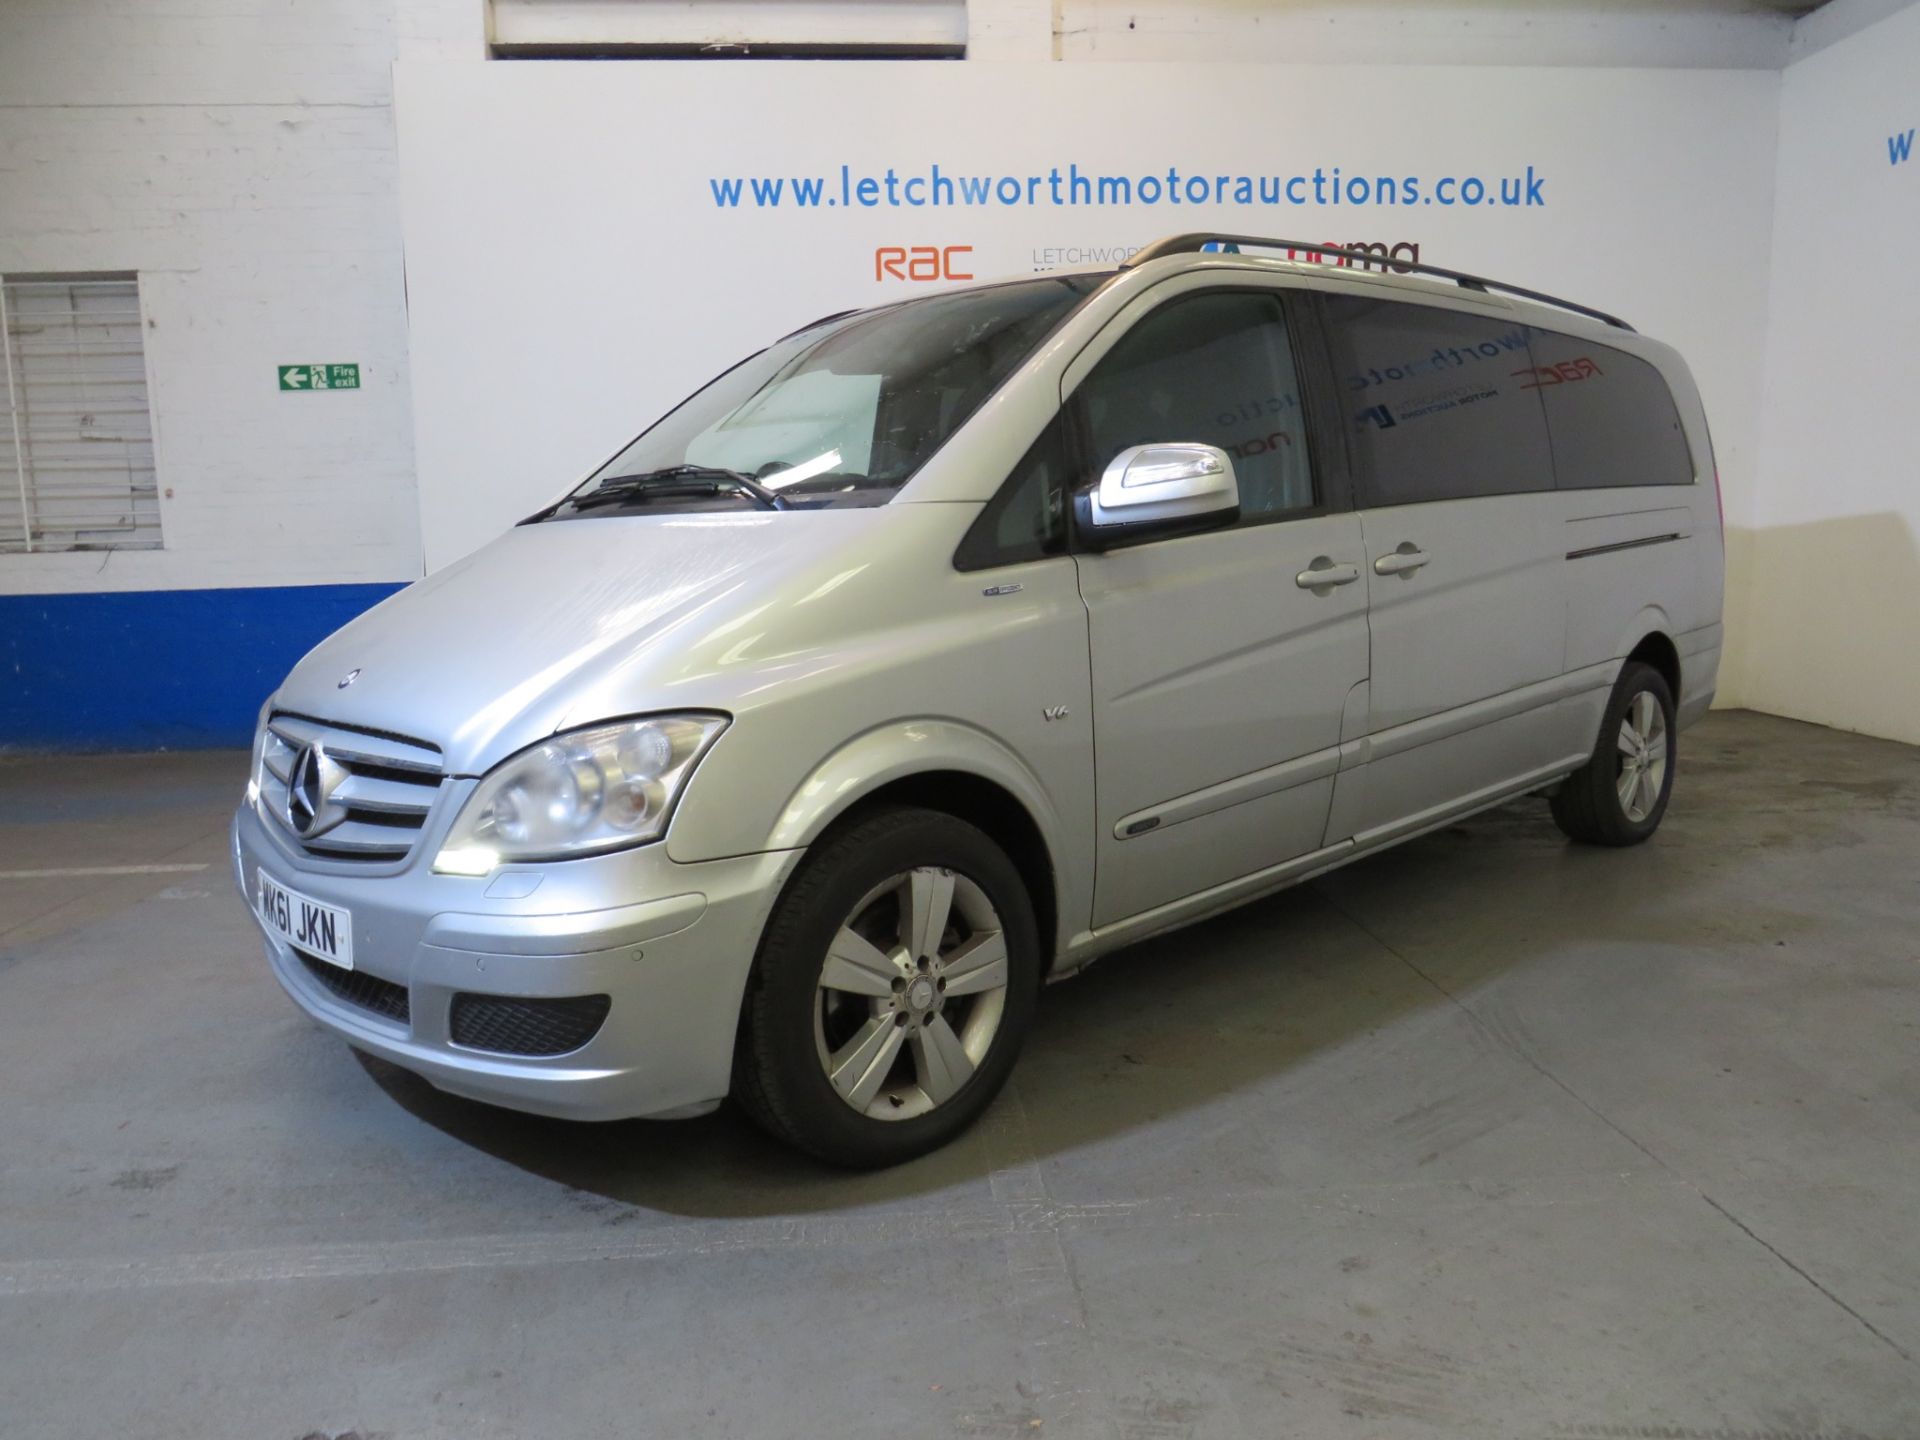 2011 Mercedes Benz Viano Ambient 3.0 CDI Blue Auto 8 Seater - 2987cc - Image 3 of 10